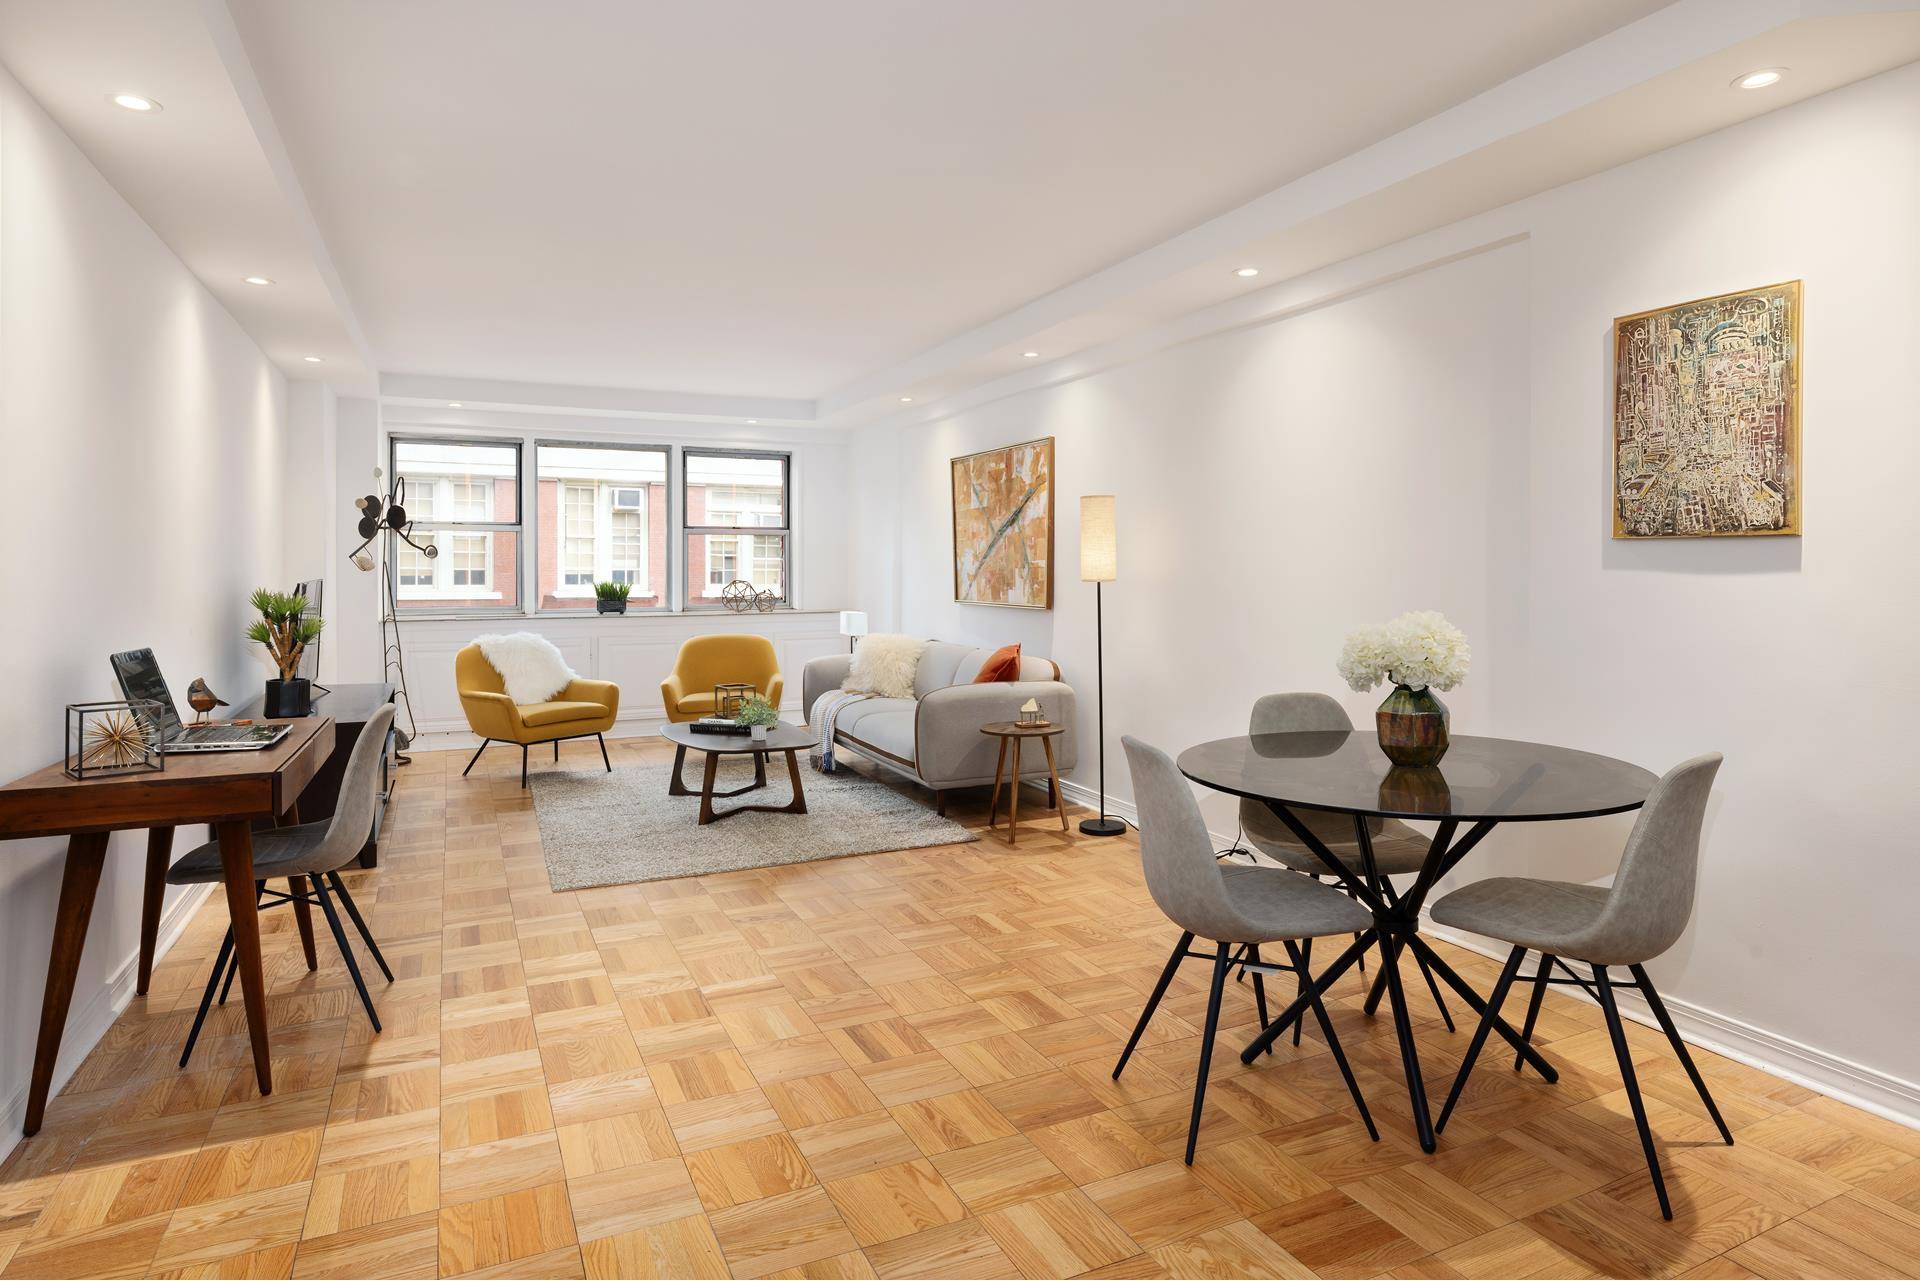 Welcome Home to this Upper East Side, oversized, rare, split one bedroom one bathroom apartment located in the luxury condo The Hardenbrook House.